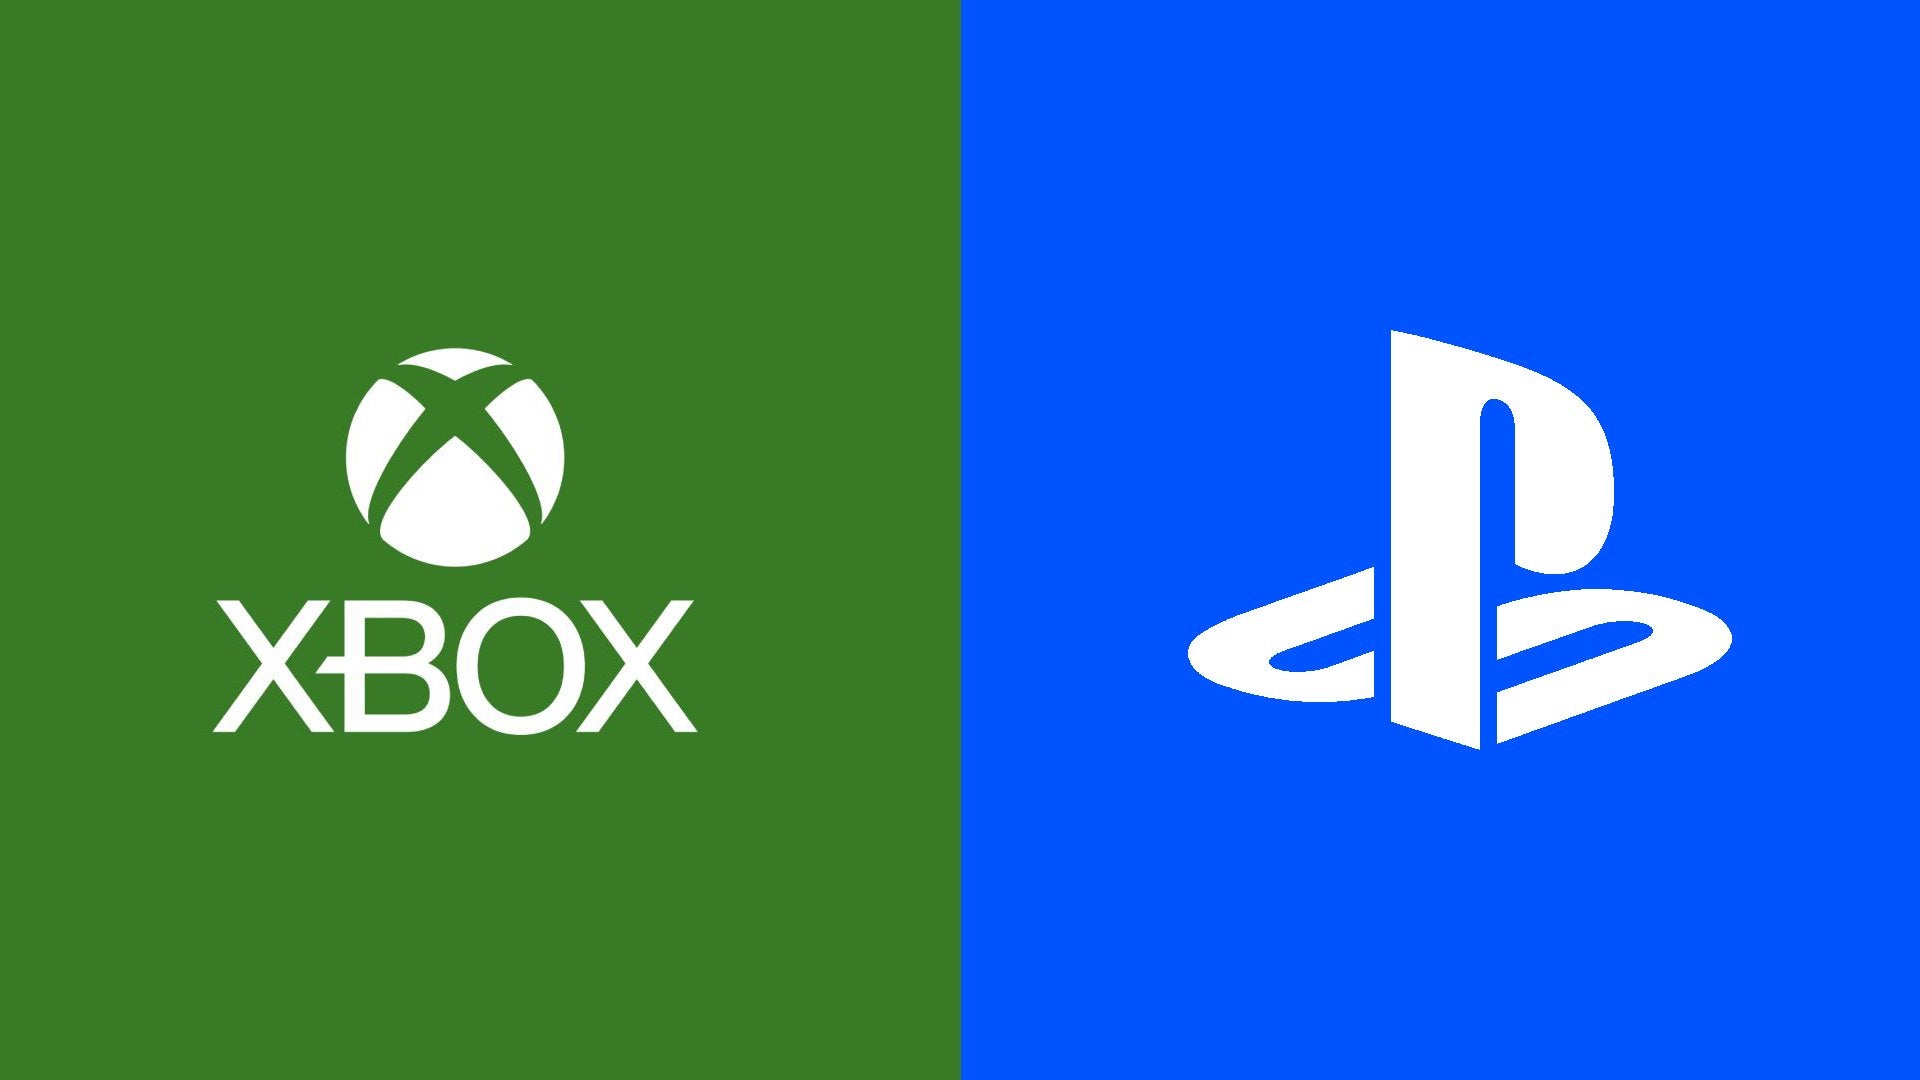 On the left is the Xbox logo on a green background and on the right is the PlayStation logo on a blue background.